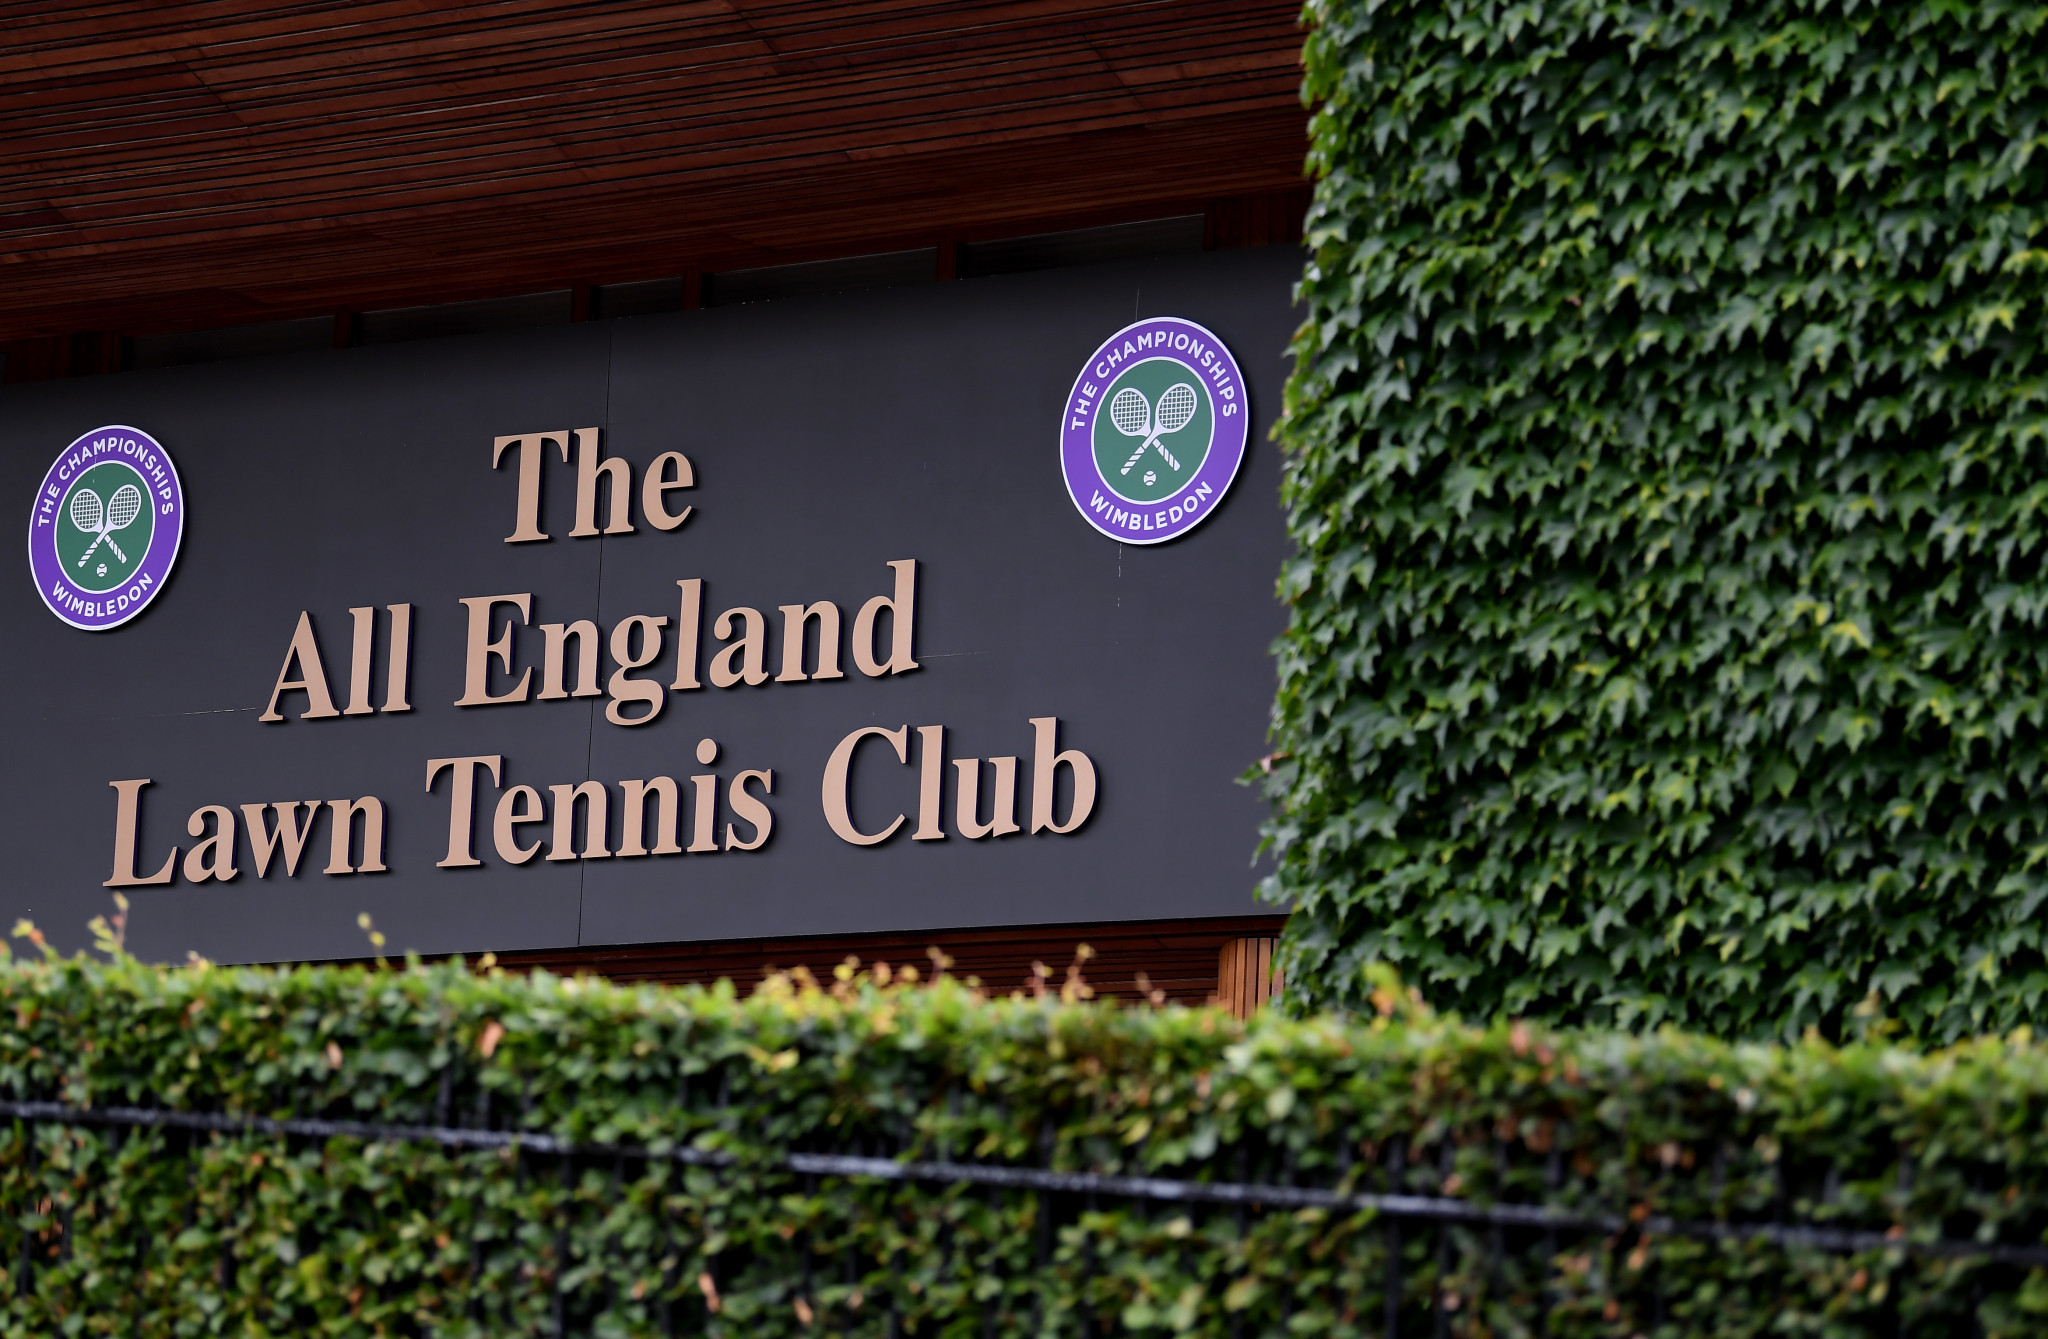 Prize money worth £10 million to be distributed to players after Wimbledon cancellation